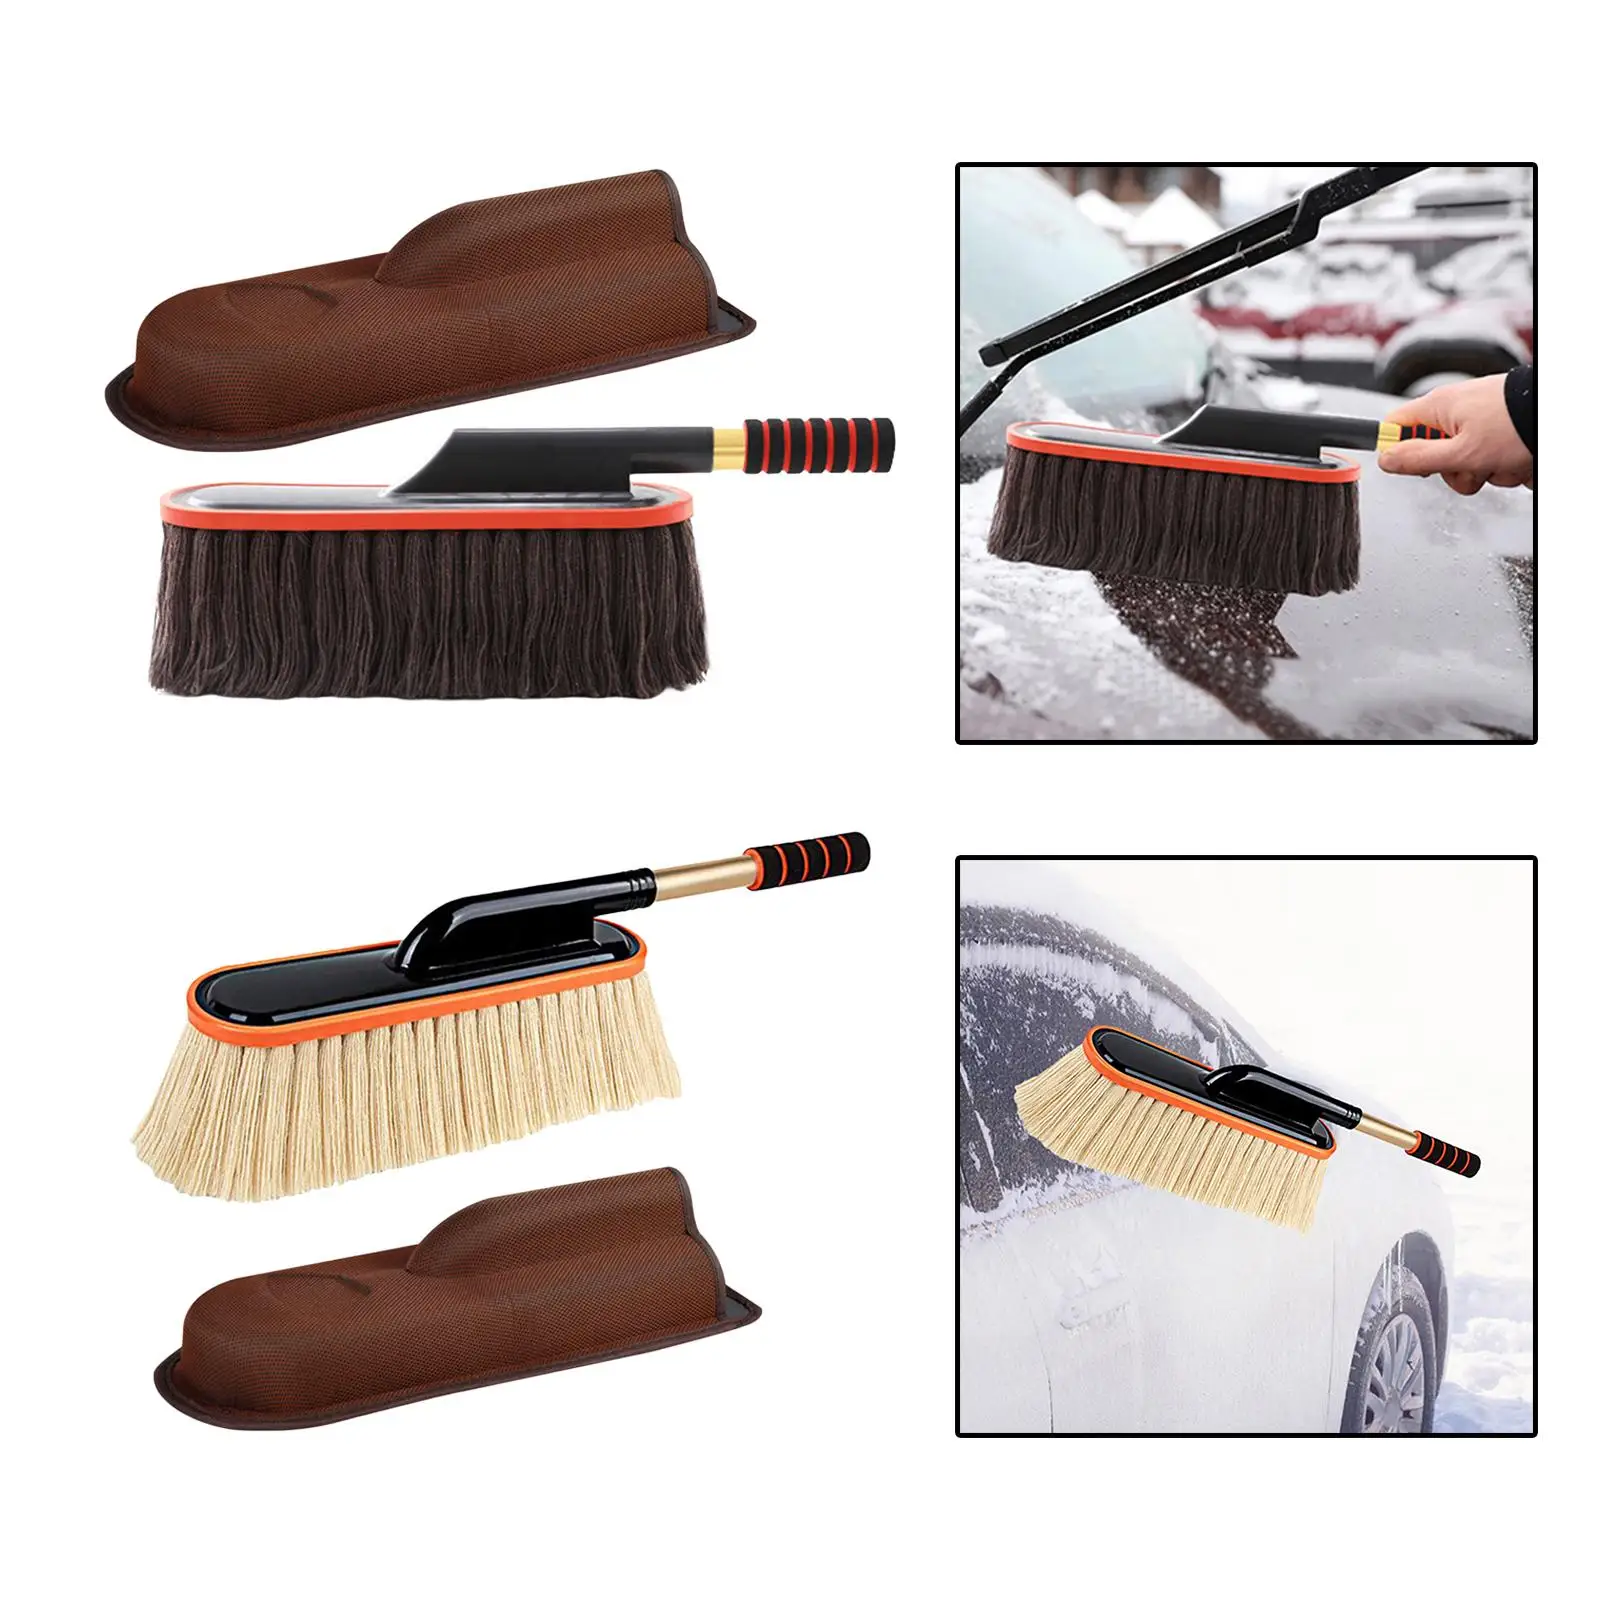 2x Car Duster Dusting Tool Mop Cleaning Brush for Kitchen Automotive Truck